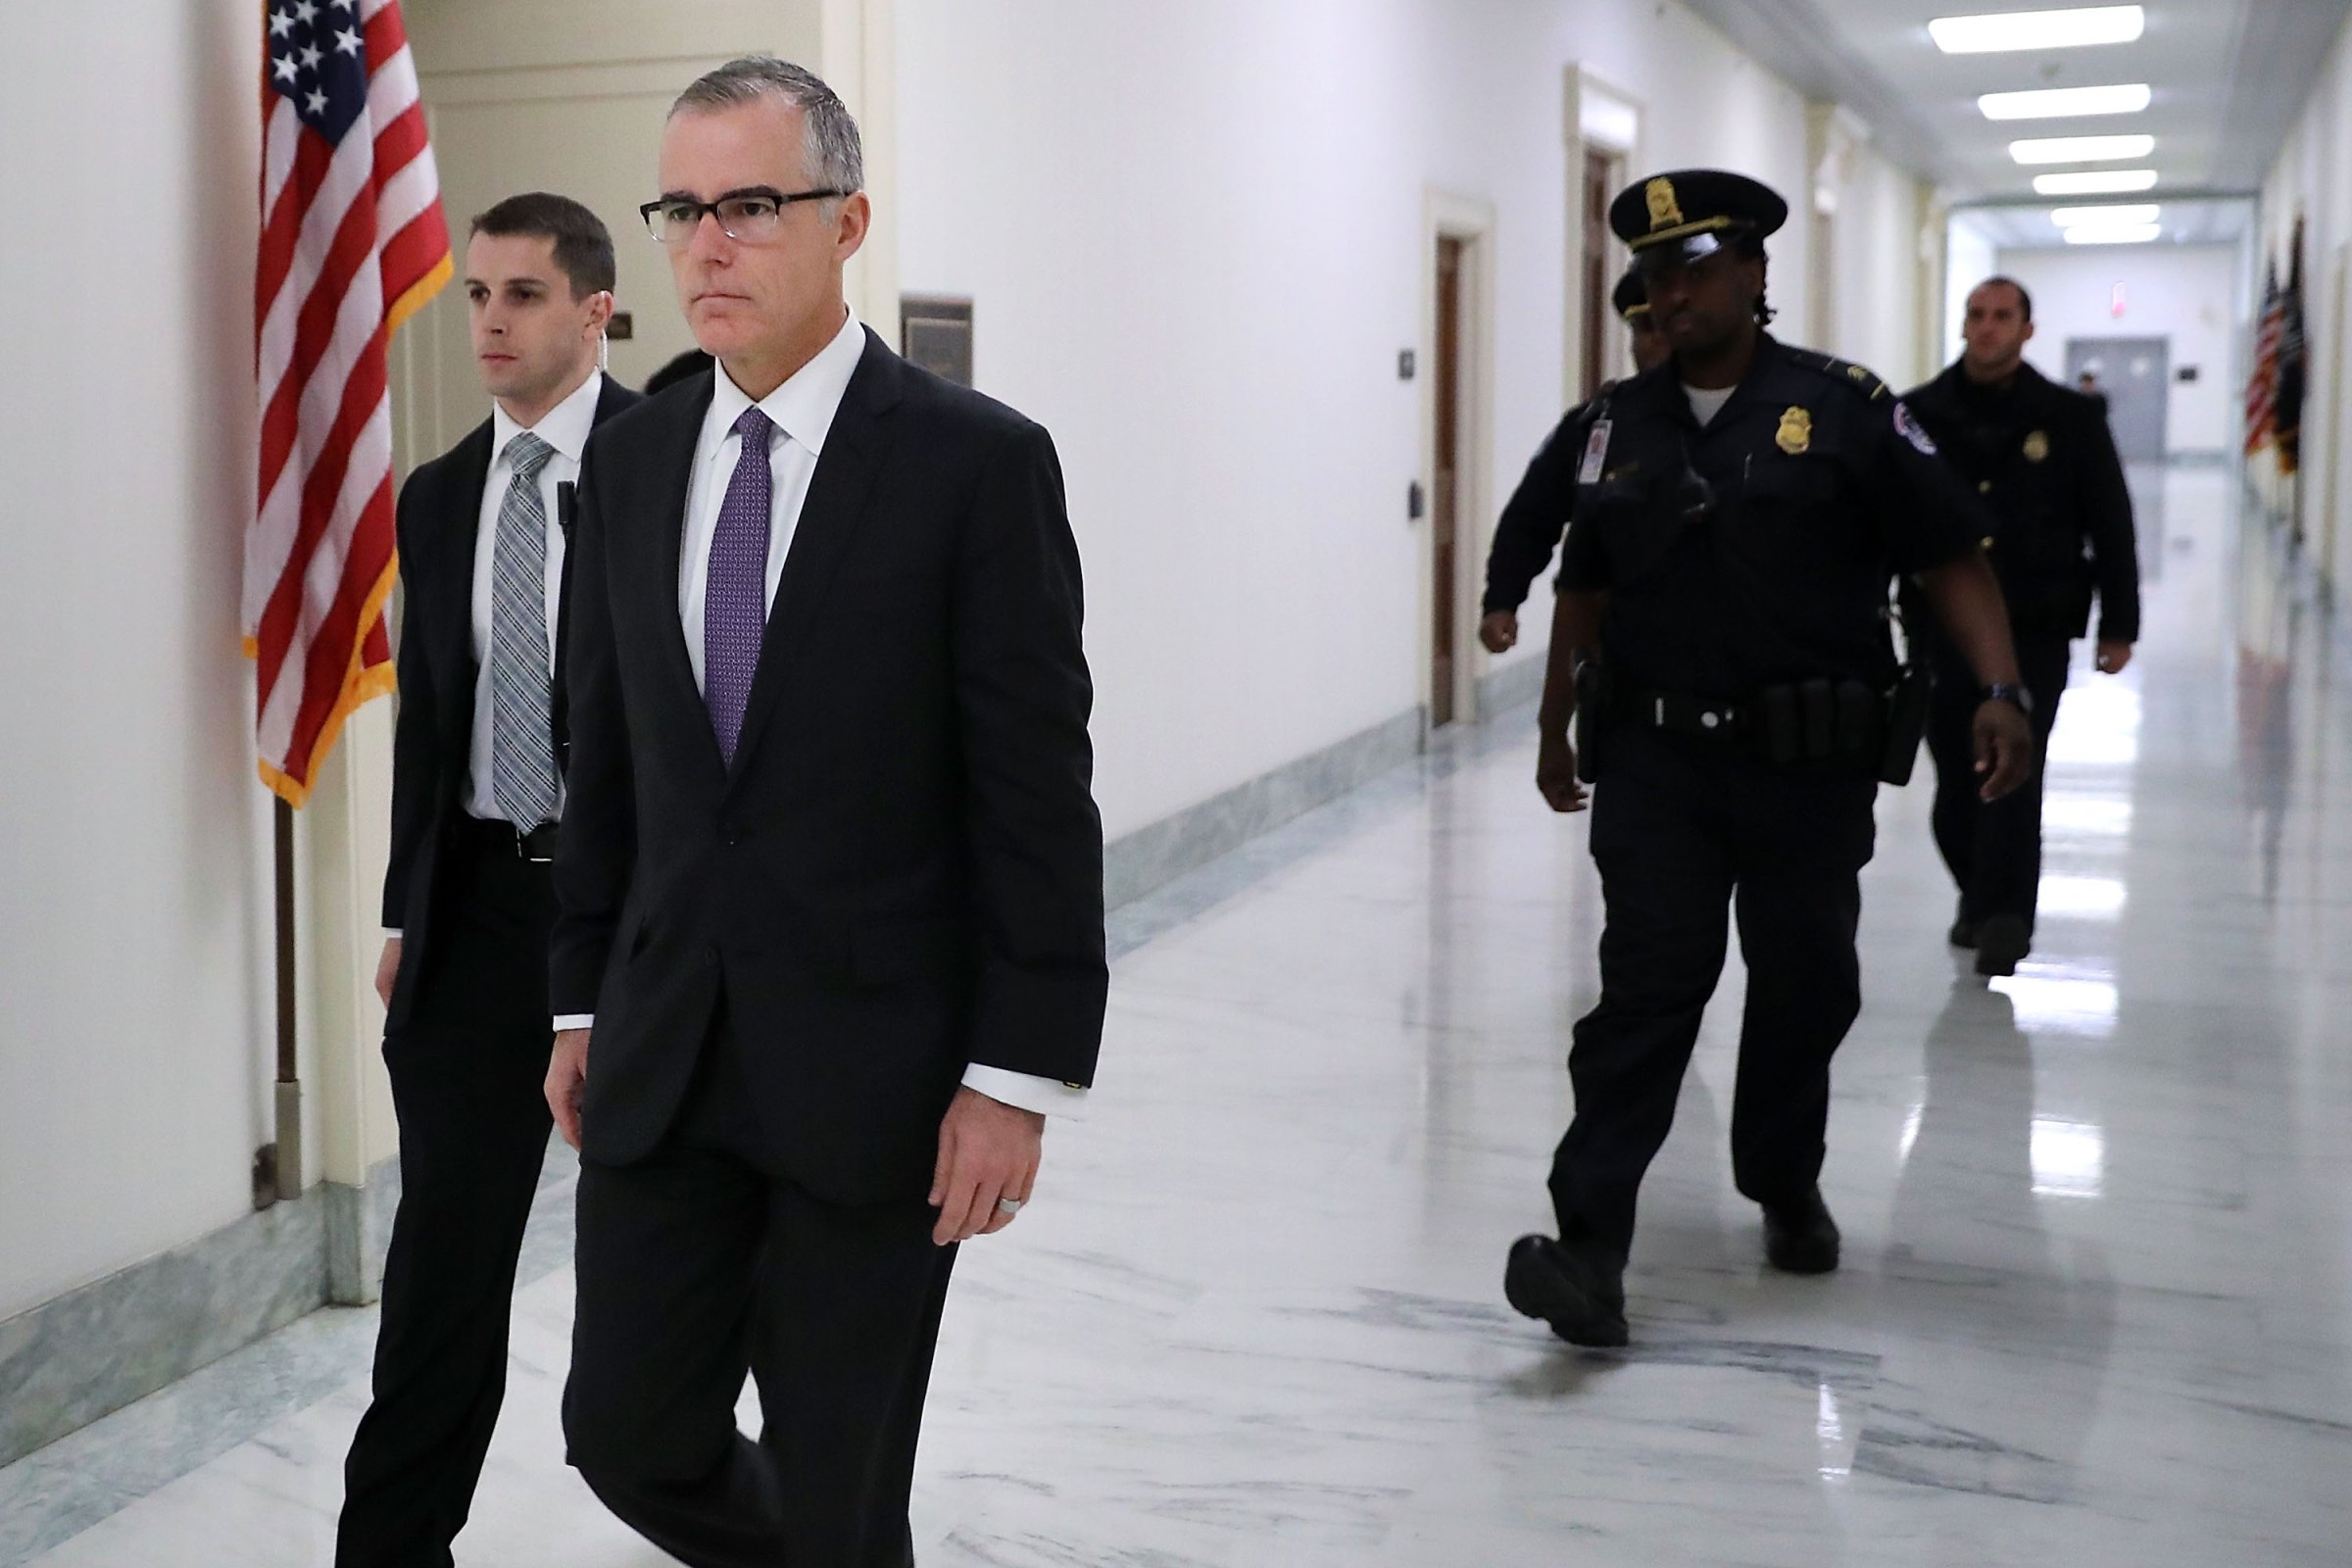 McCabe walking while being escorted by Capitol Police